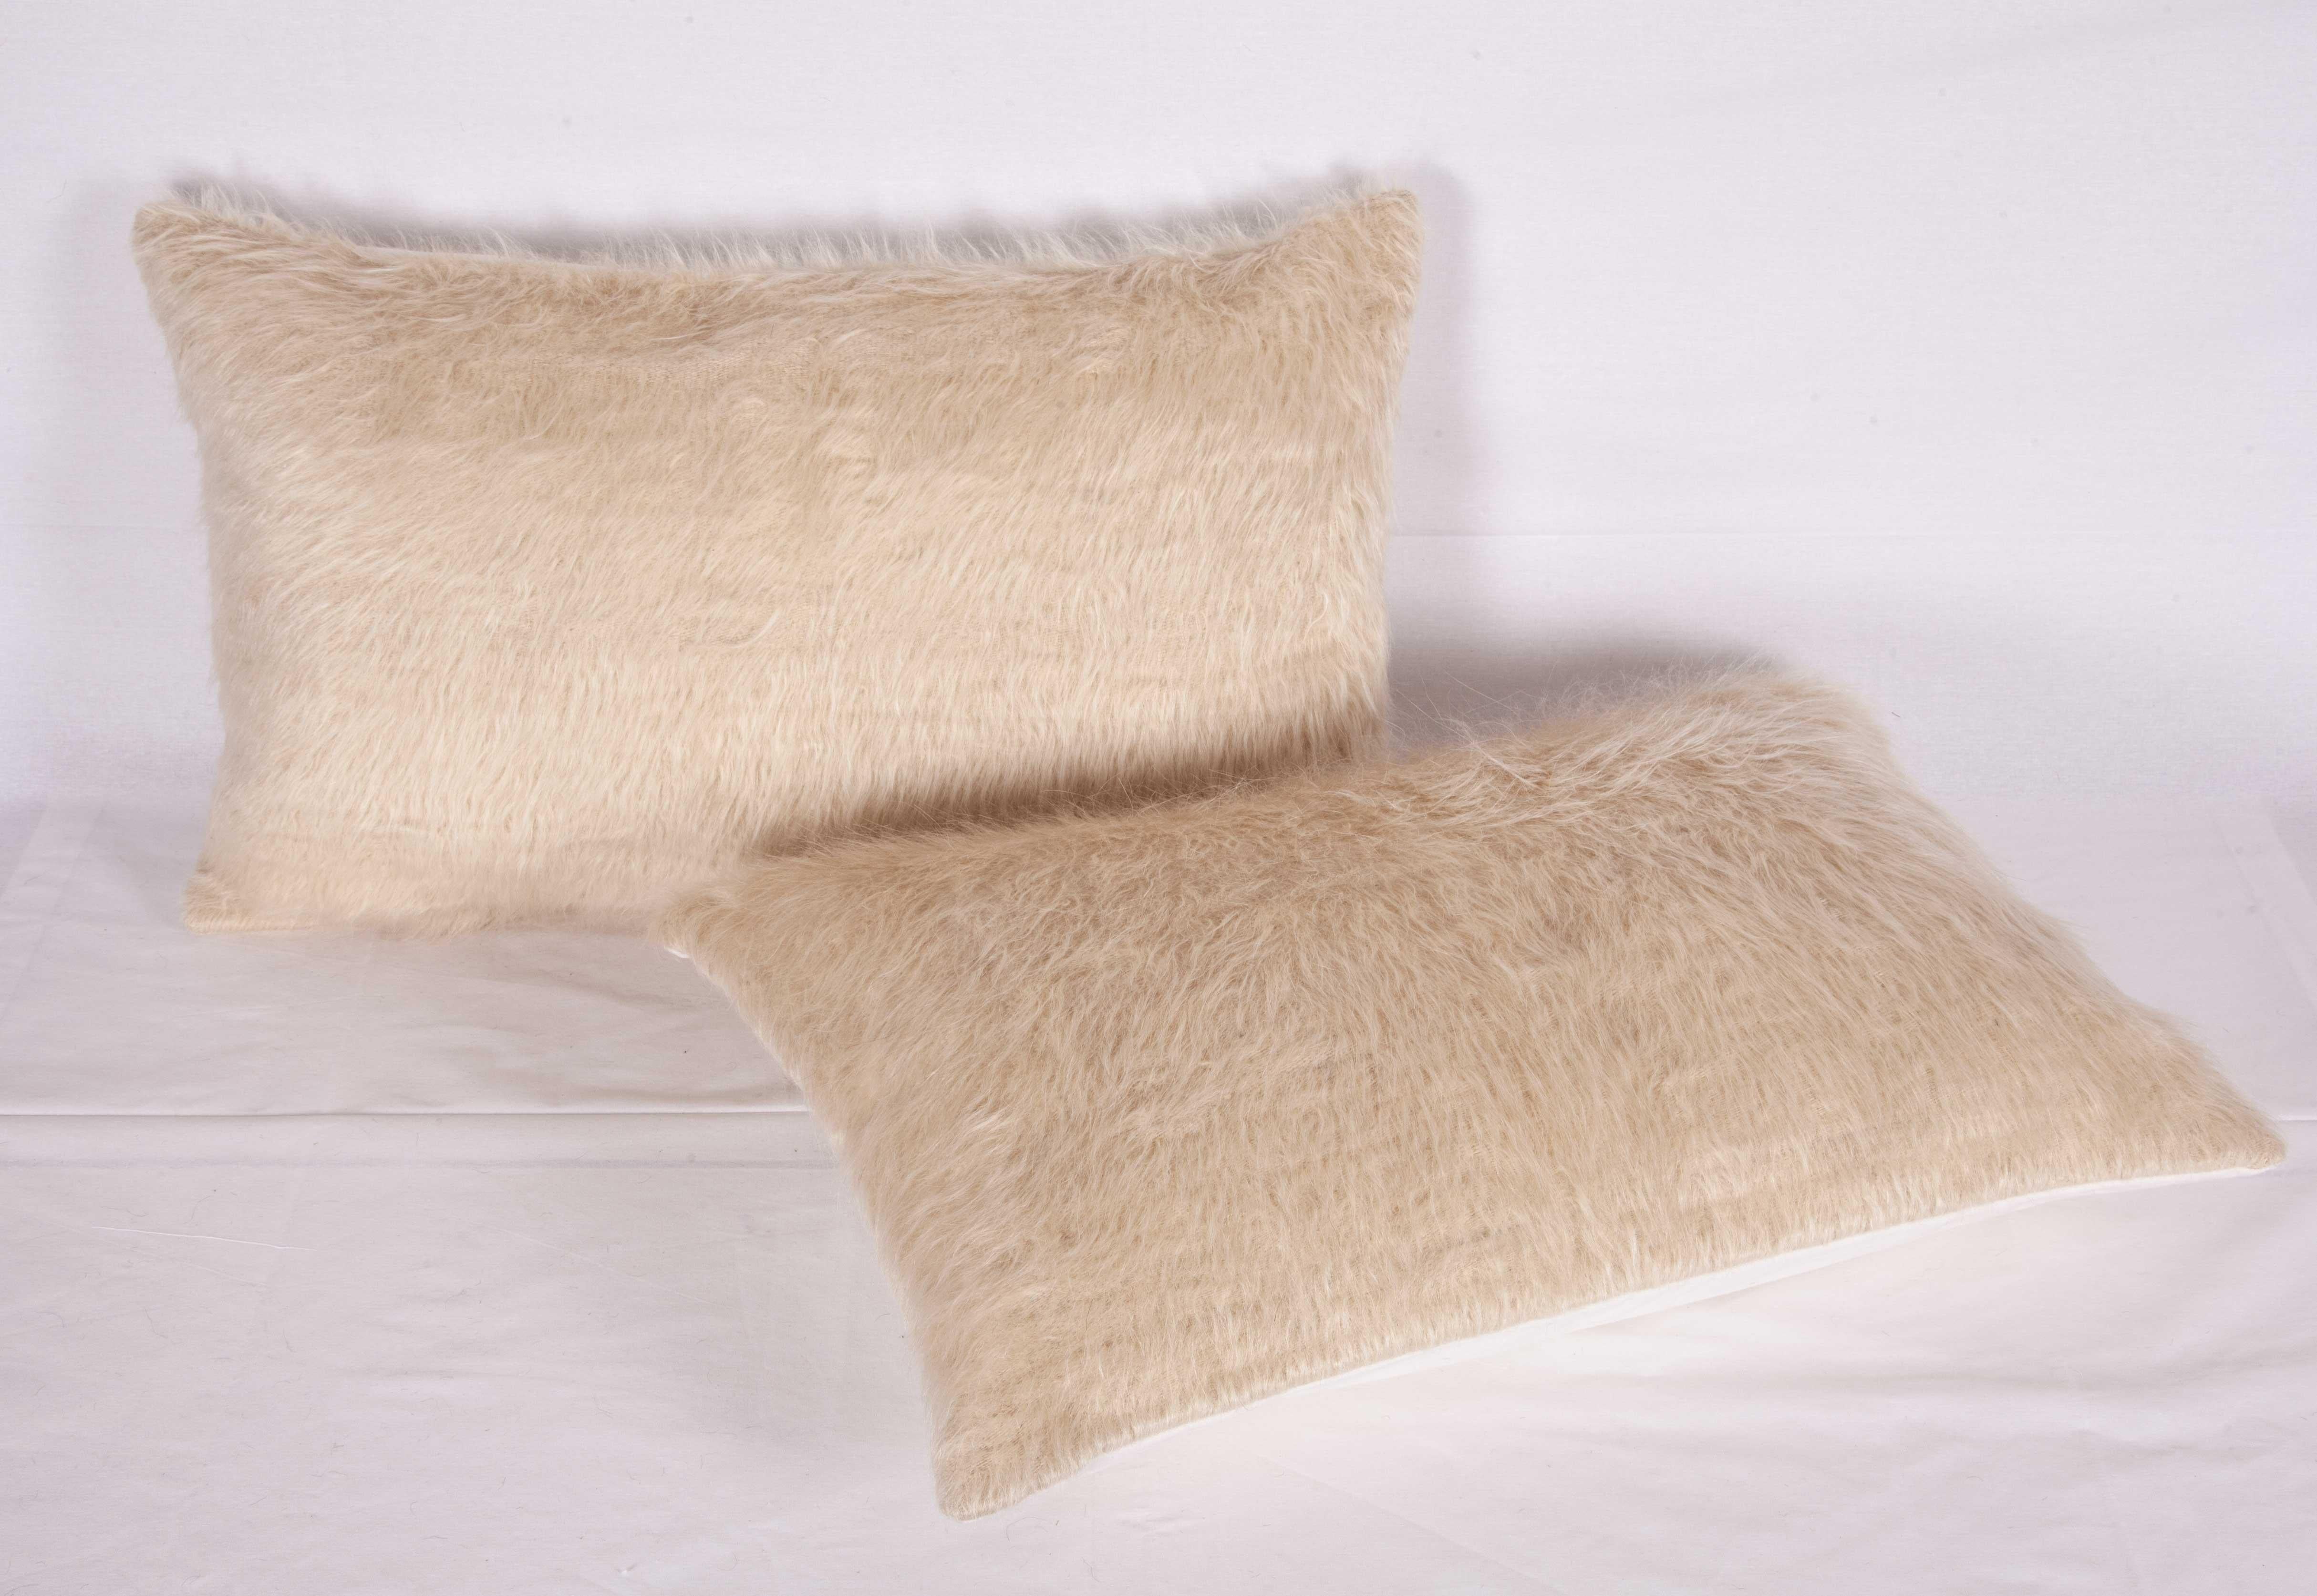 Hand-Woven Pillow Cases Fashioned from a Mid-20th Century Anatolian Angora Siirt Blanket